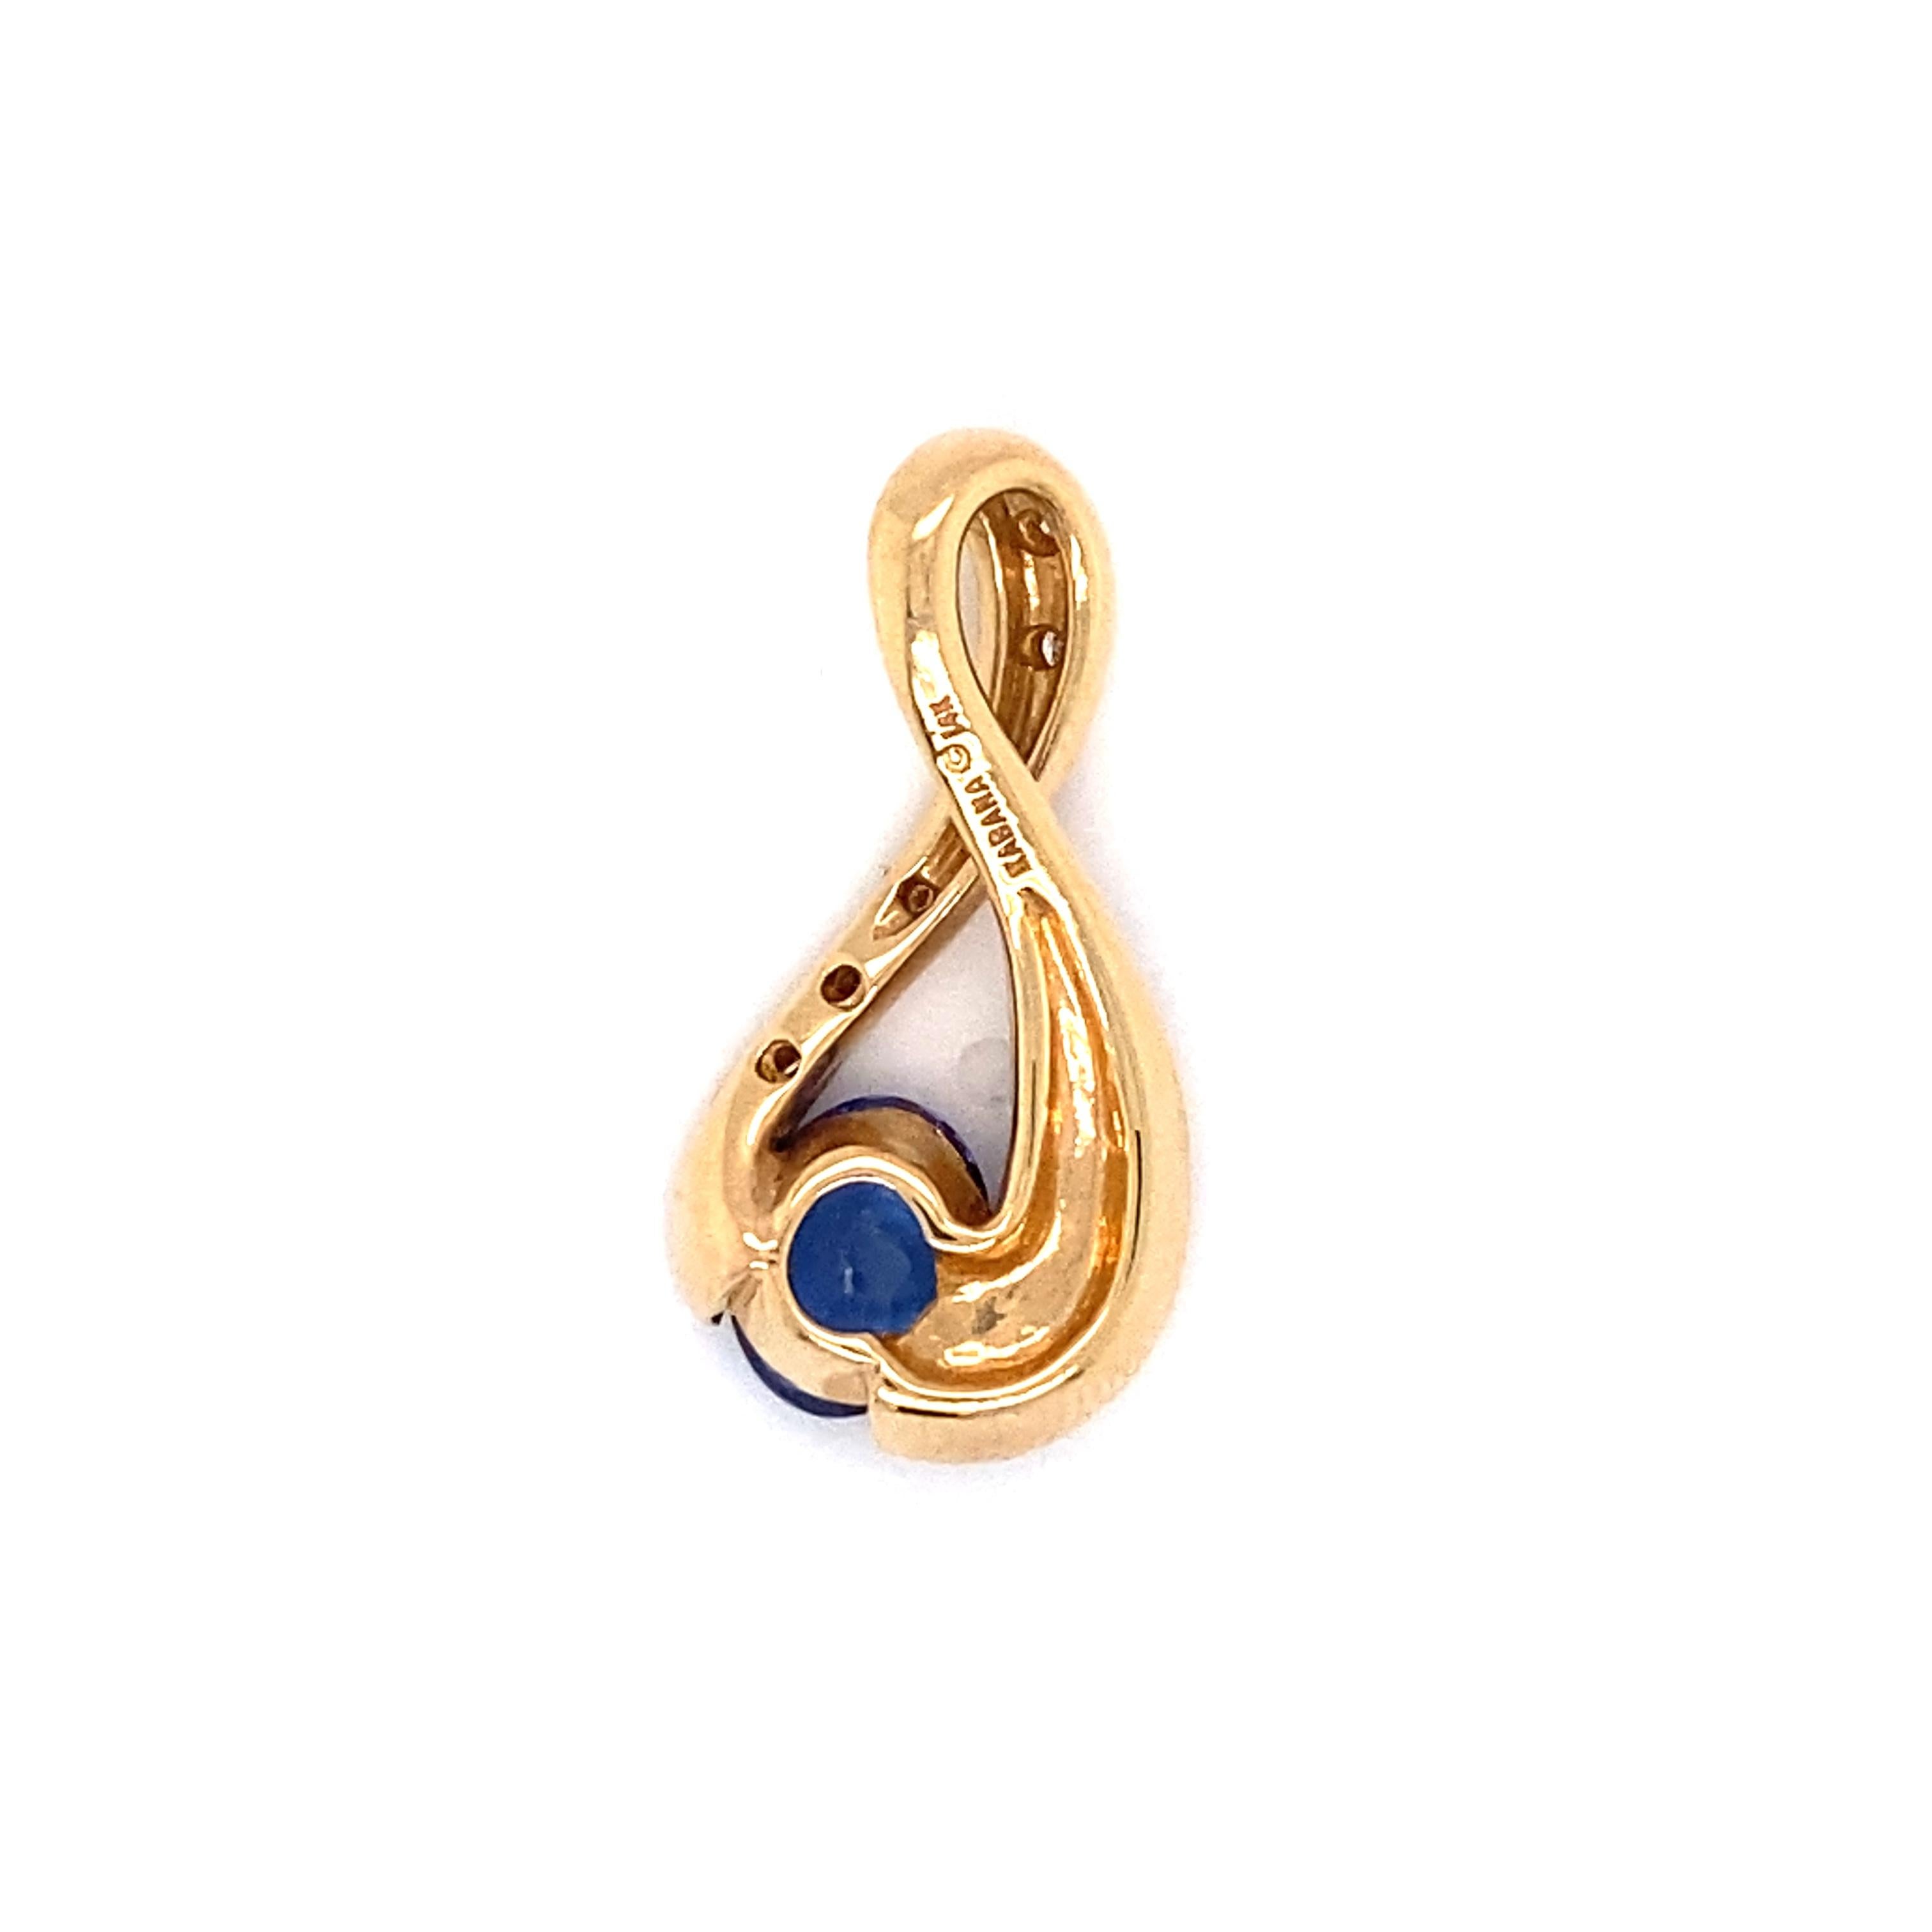 Metal Type: 14 Karat Yellow Gold 
Weight: 5.5 grams
Dimensions: 1 inch x 0.5 inch 

Diamond Details:
Carat: 0.10 carat total weight
Shape: Round
Color: G
Clarity: VS1

Tanzanite Details:
Carat: 2.0 carats
Shape: Oval